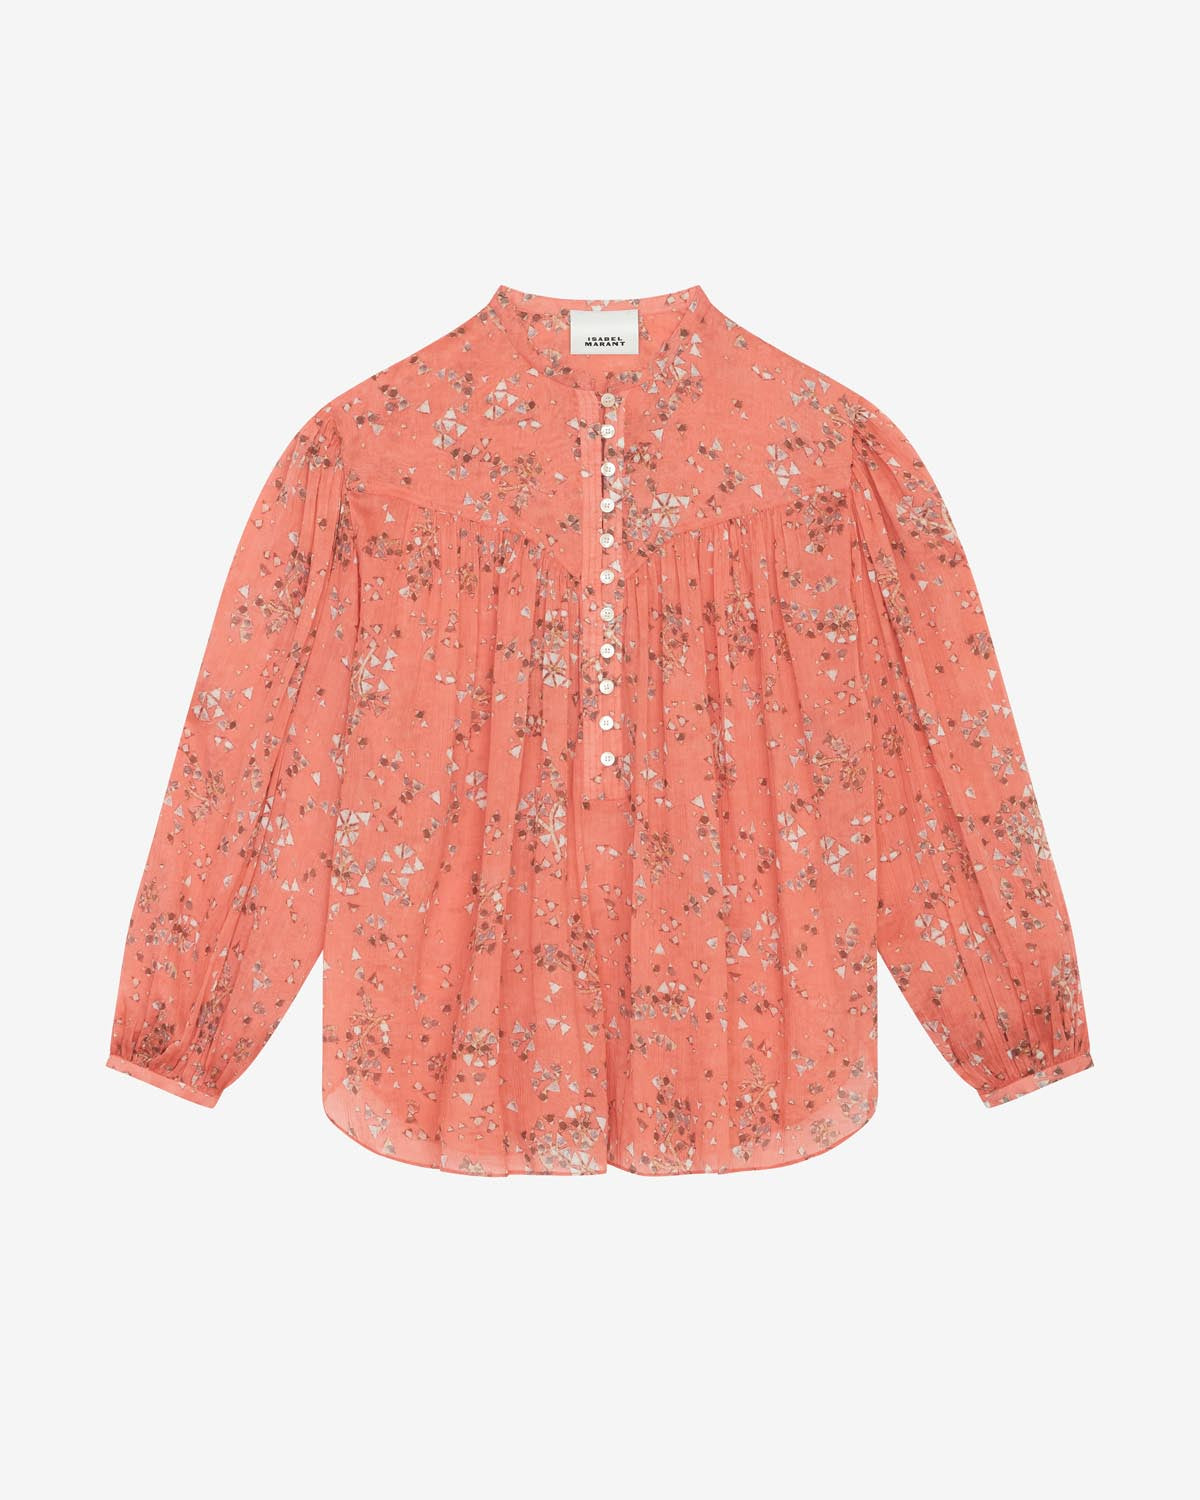 Tops and Shirts Woman | ISABEL MARANT Official Online Store